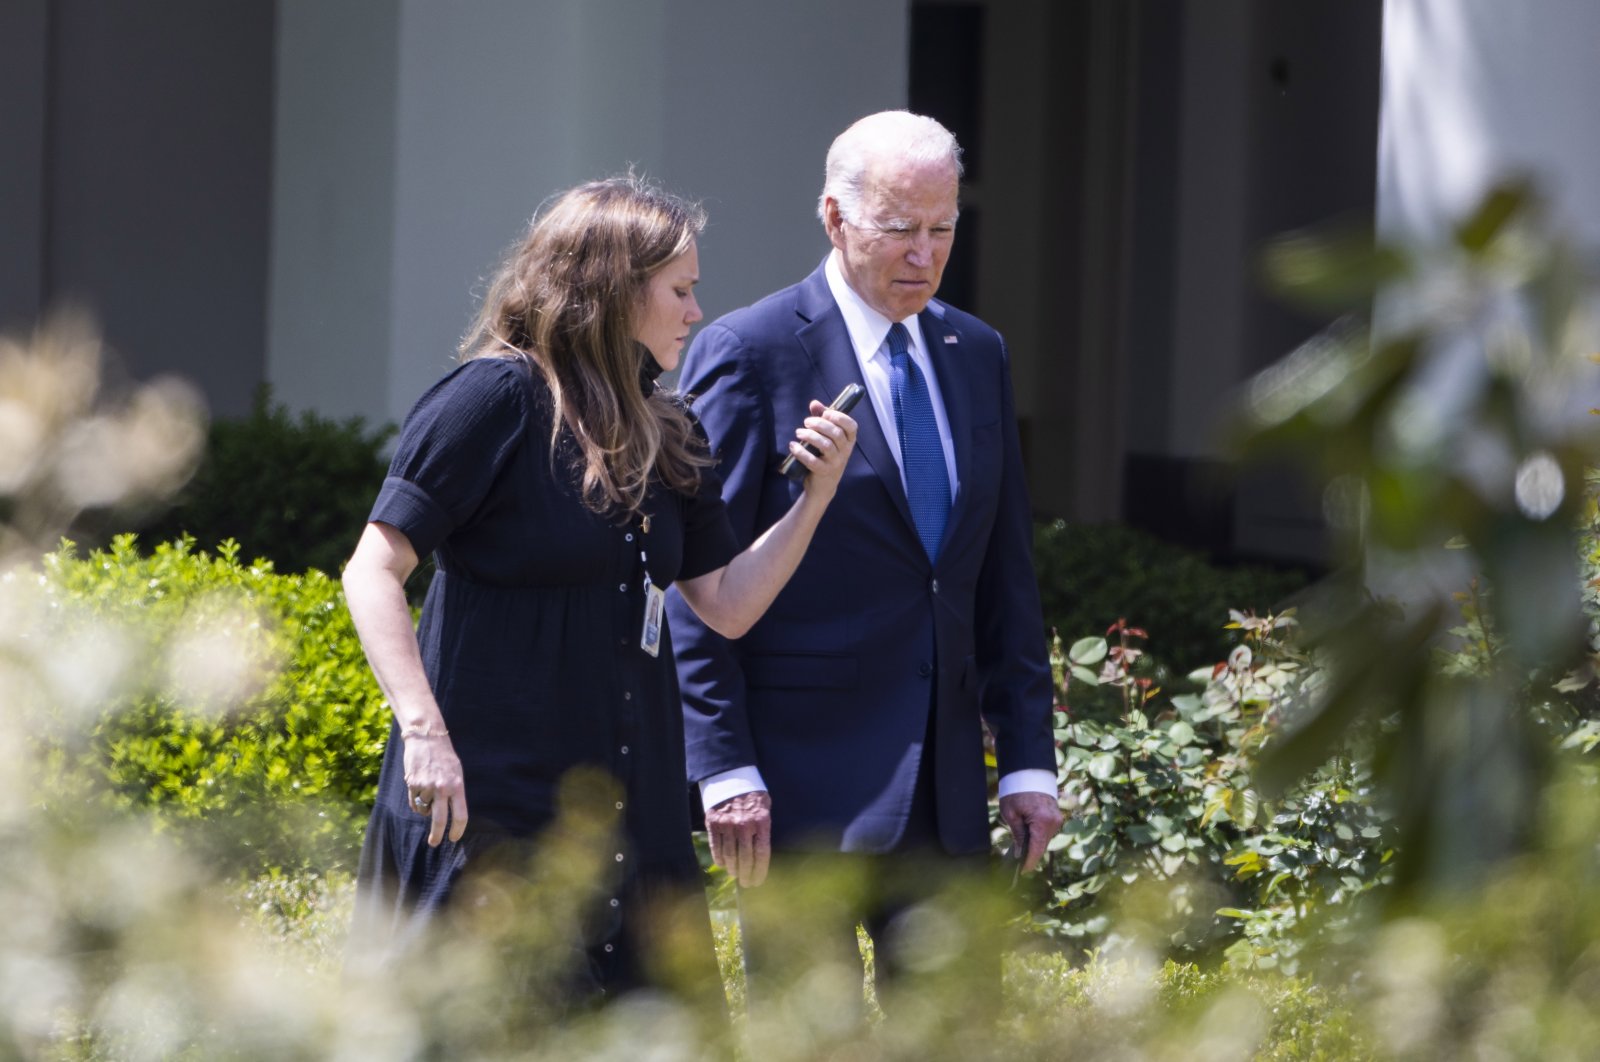 U.S. President Joe Biden walks through the Rose Garden as he prepares to welcome the Tampa Bay Lightning hockey team to the White House to celebrate their 2020 and 2021 Stanley Cup championships in Washington, D.C., U.S., April 25, 2022. (EPA Photo)